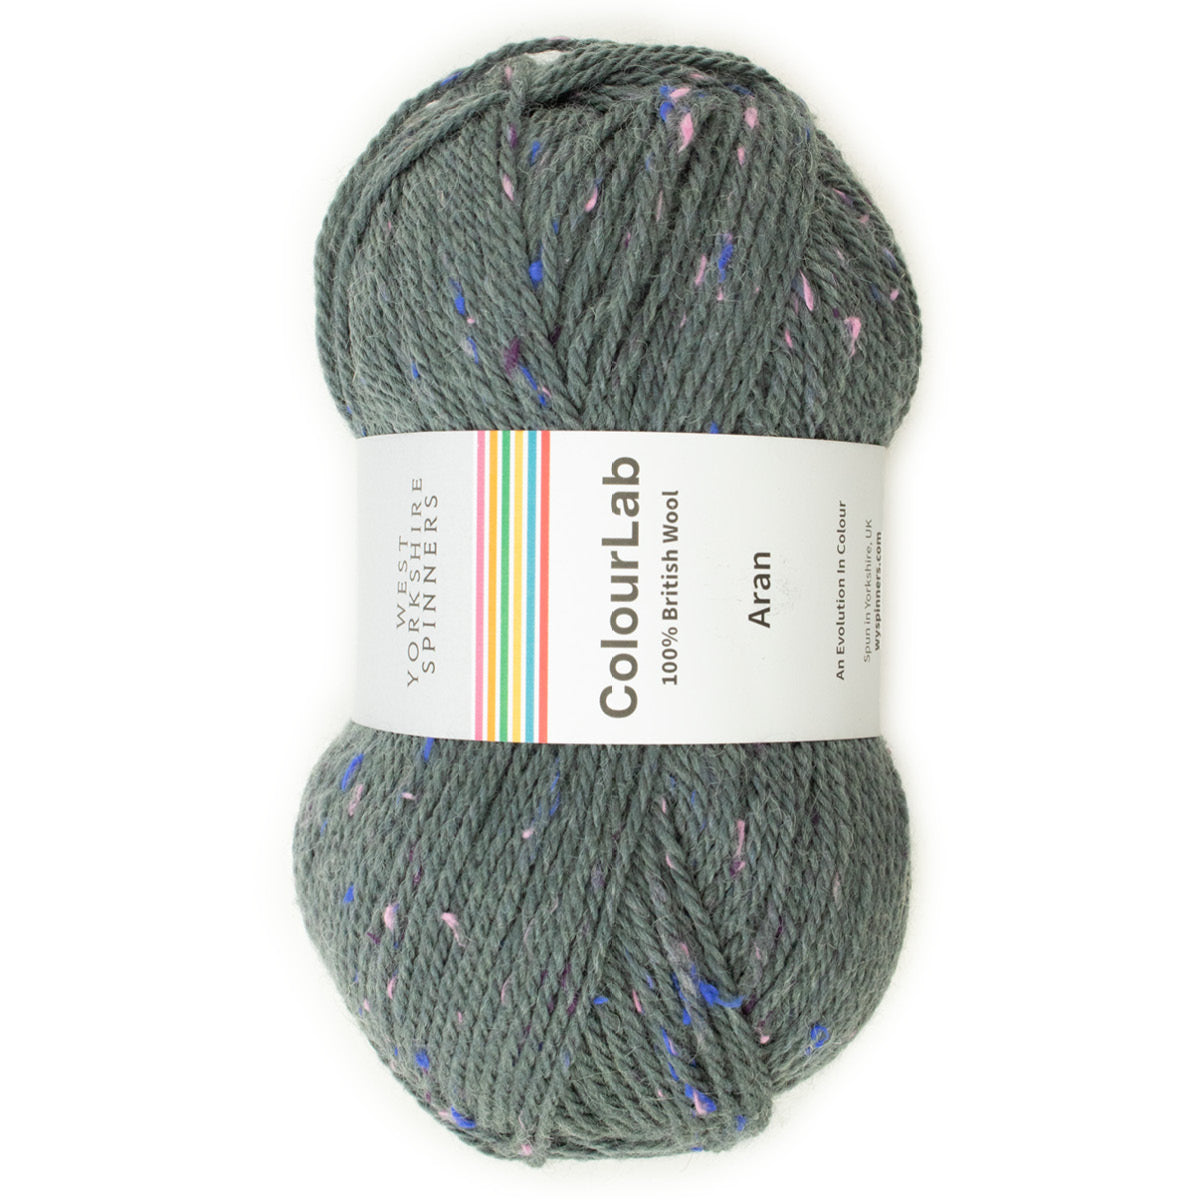 West Yorkshire Spinners Colourlab Aran Tweed